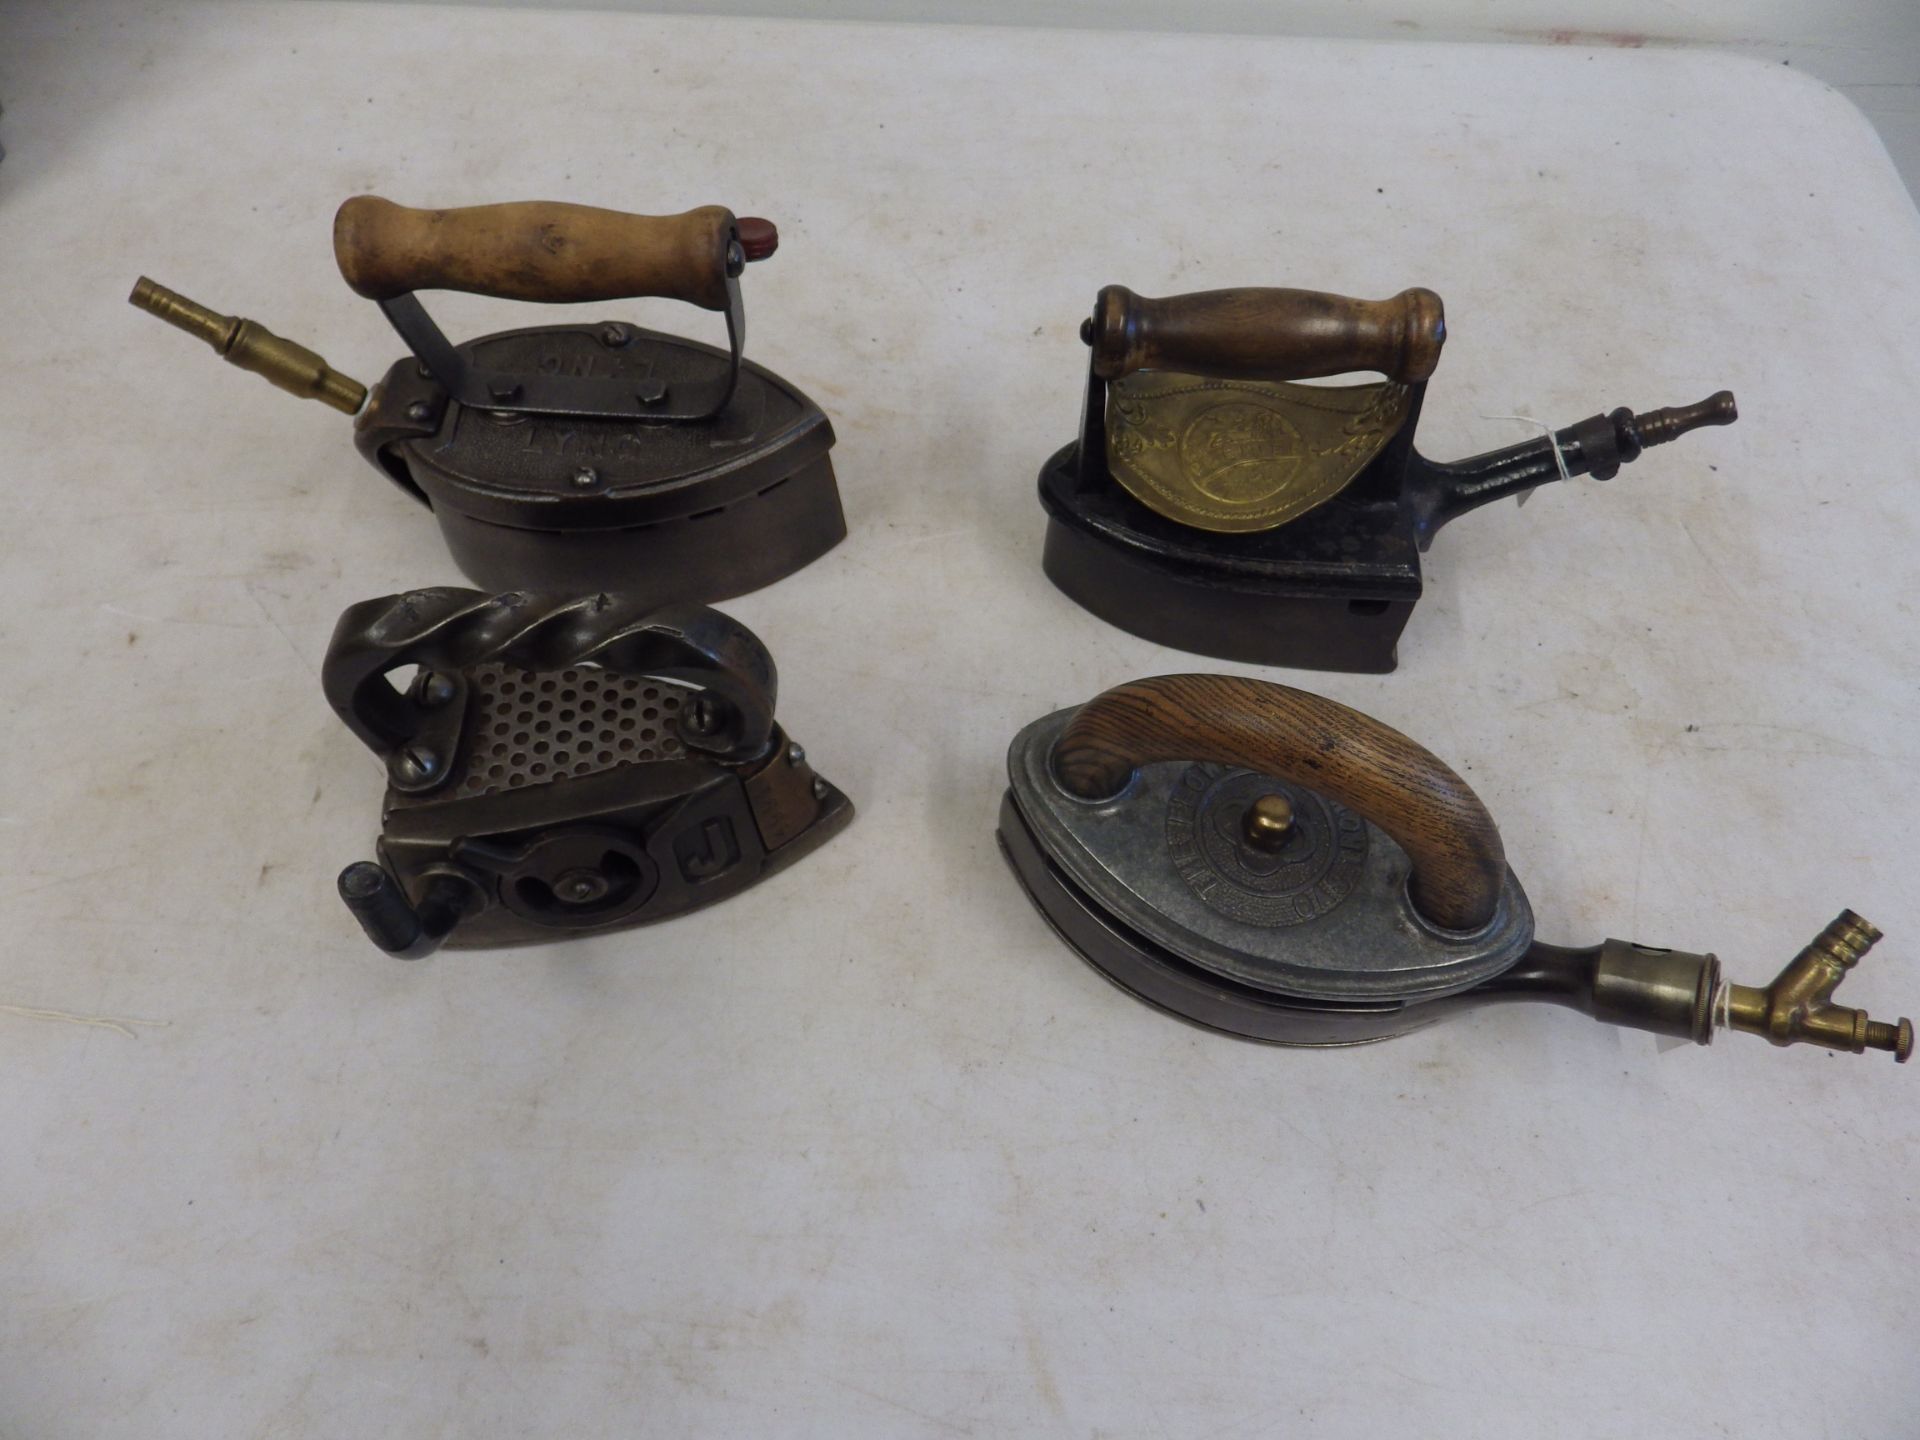 4 assorted gas irons to incl The Flower circa 1920's, Lyng rd 74378, The Premier and Beecrofts J